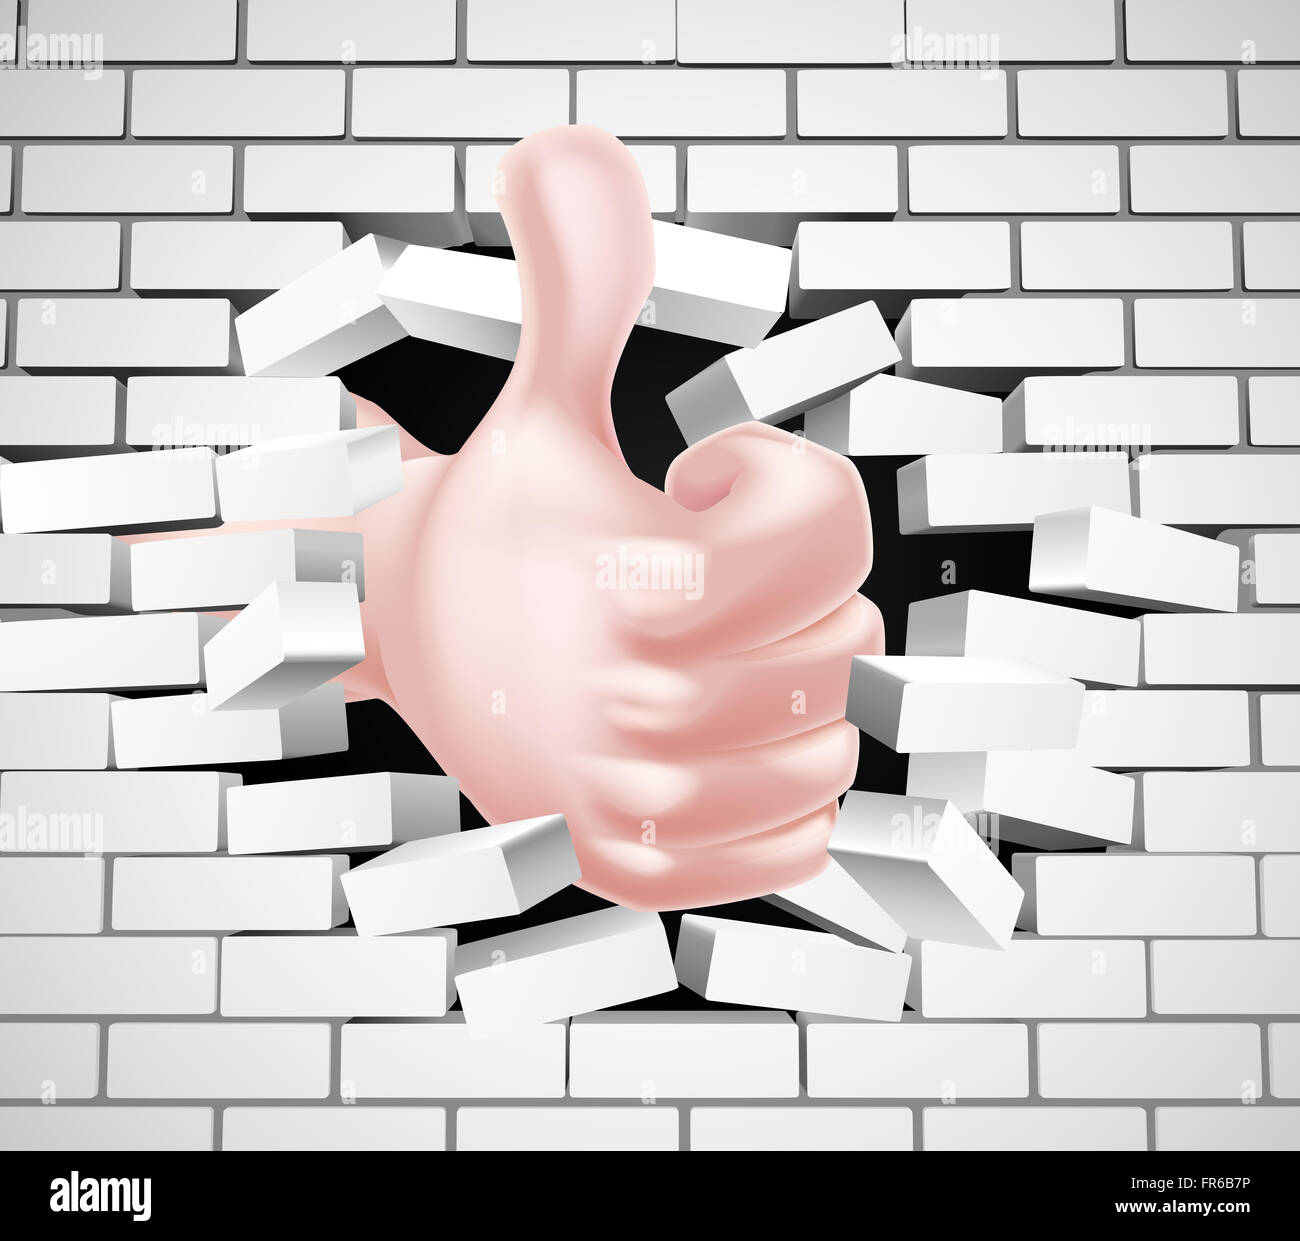 Conceptual illustration of a hand giving a thumbs up breaking through a brick wall Stock Photo